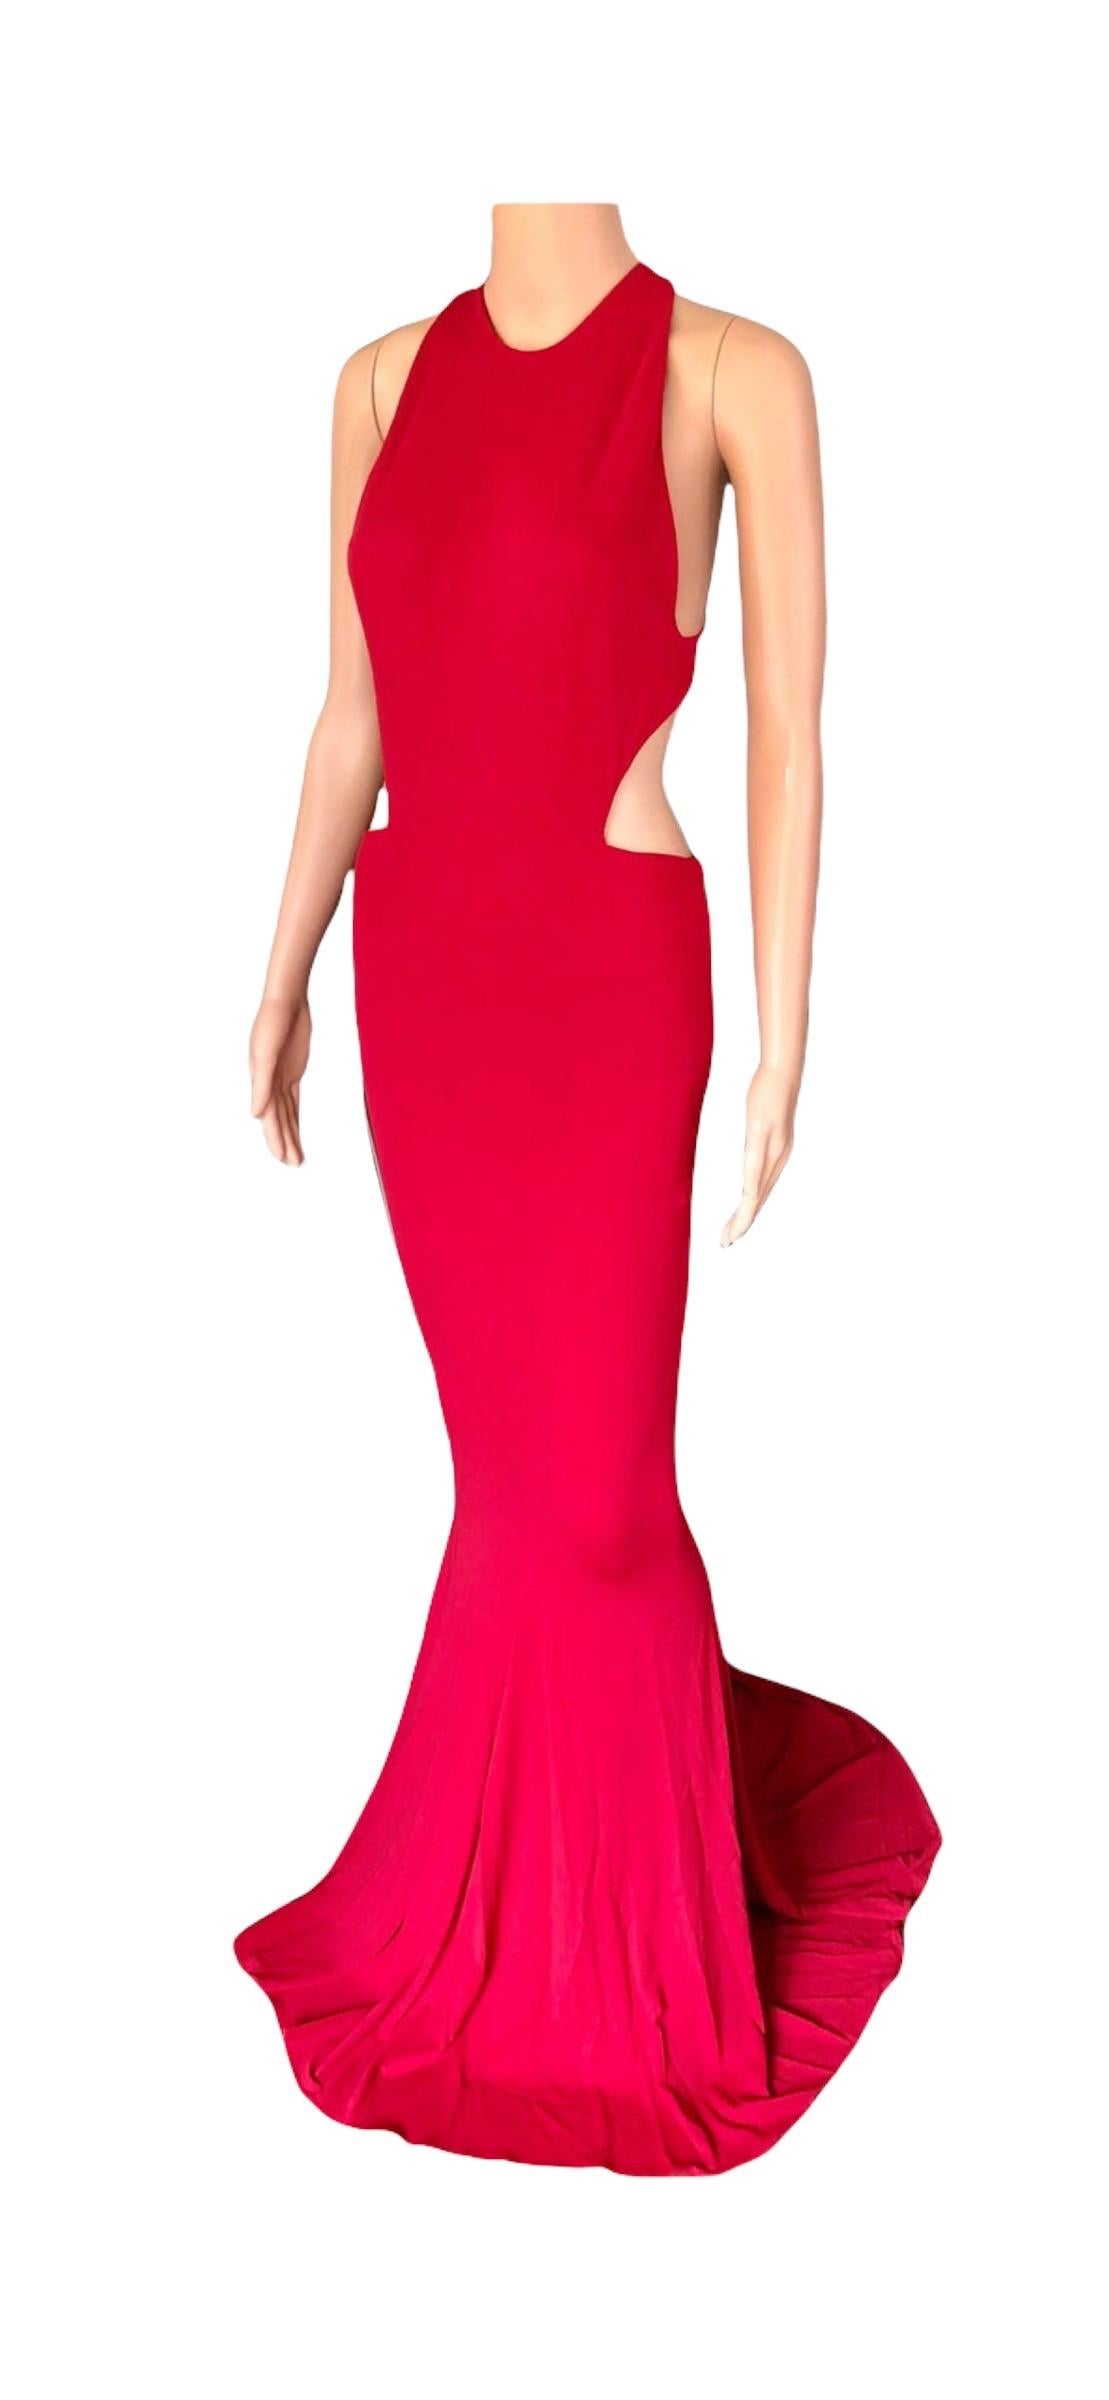 Alexandre Vauthier Cutout Backless Red Evening Dress Gown  For Sale 1